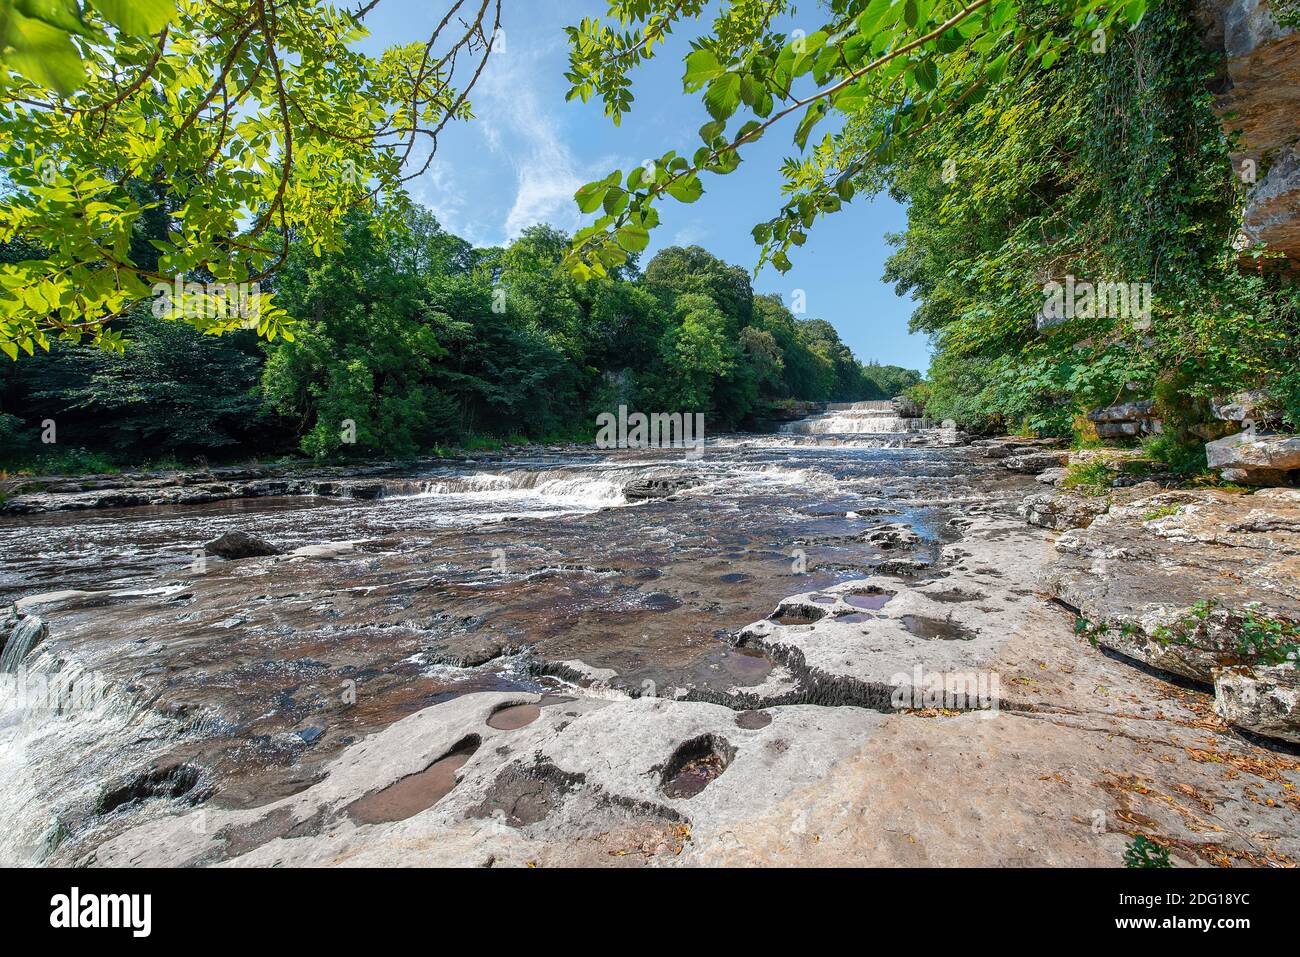 Aysgarth Falls in the Yorkshire Dales, England Stock Photo